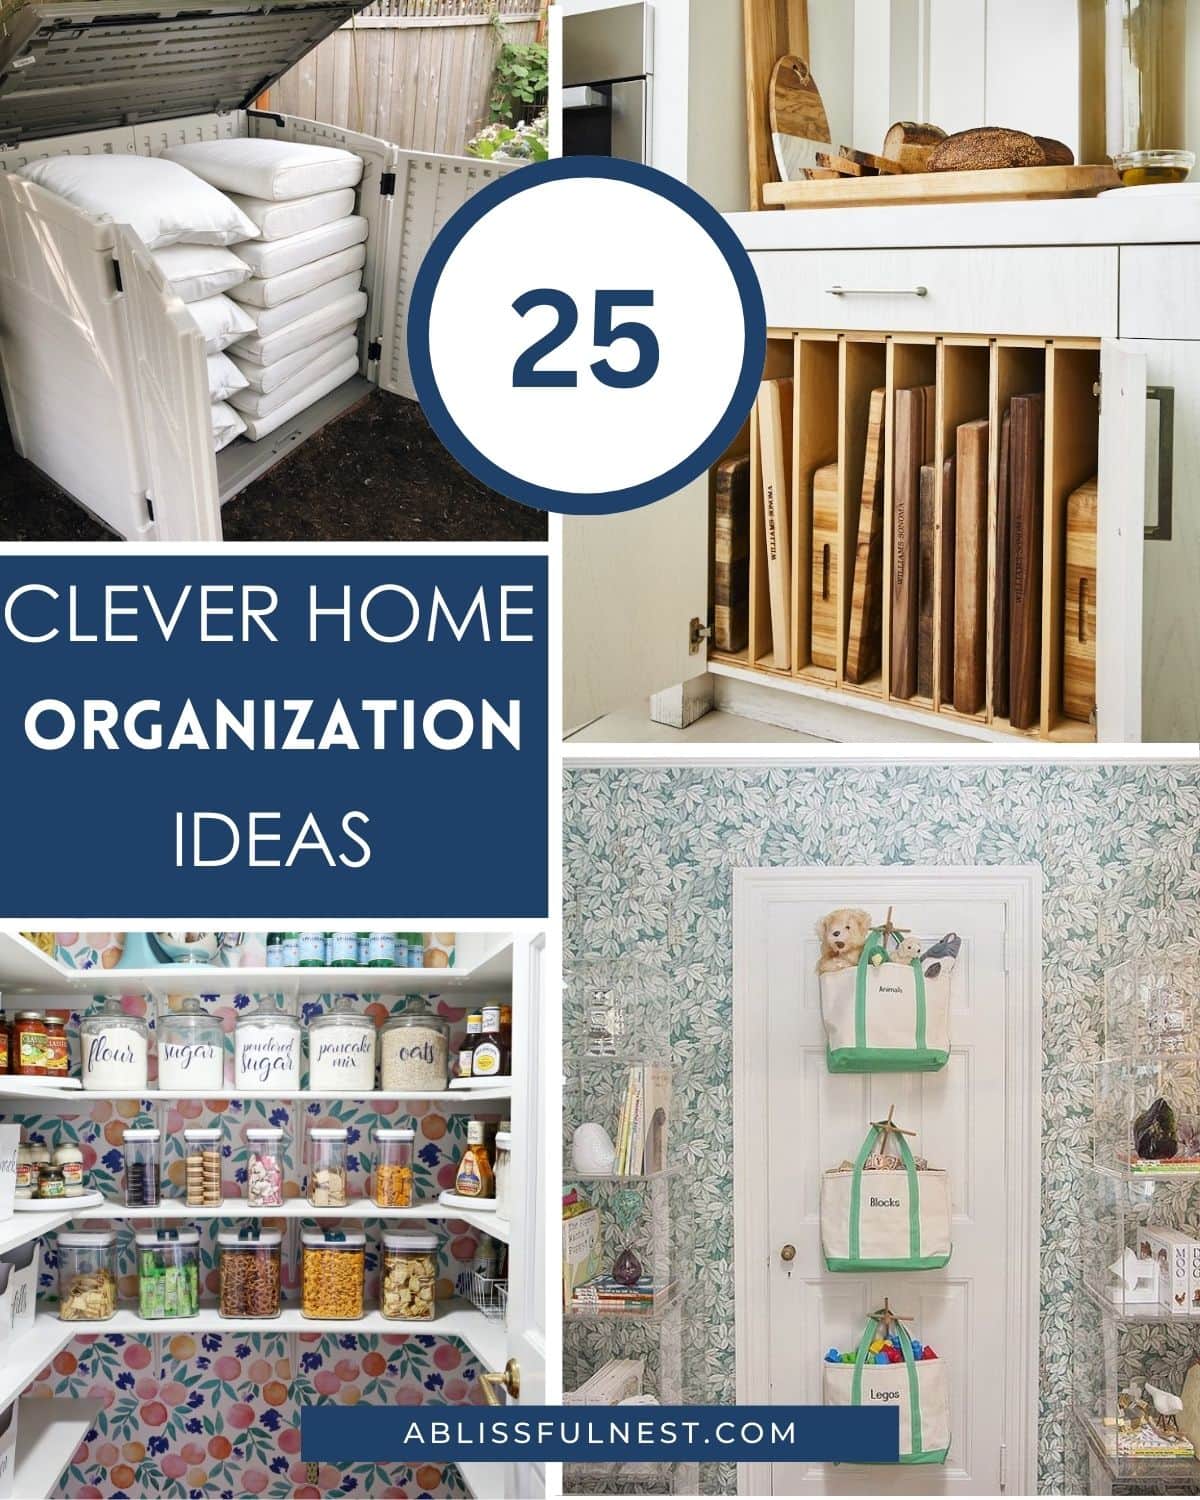 a collage of home organization ideas for kitchens, garages, bathrooms, and more.